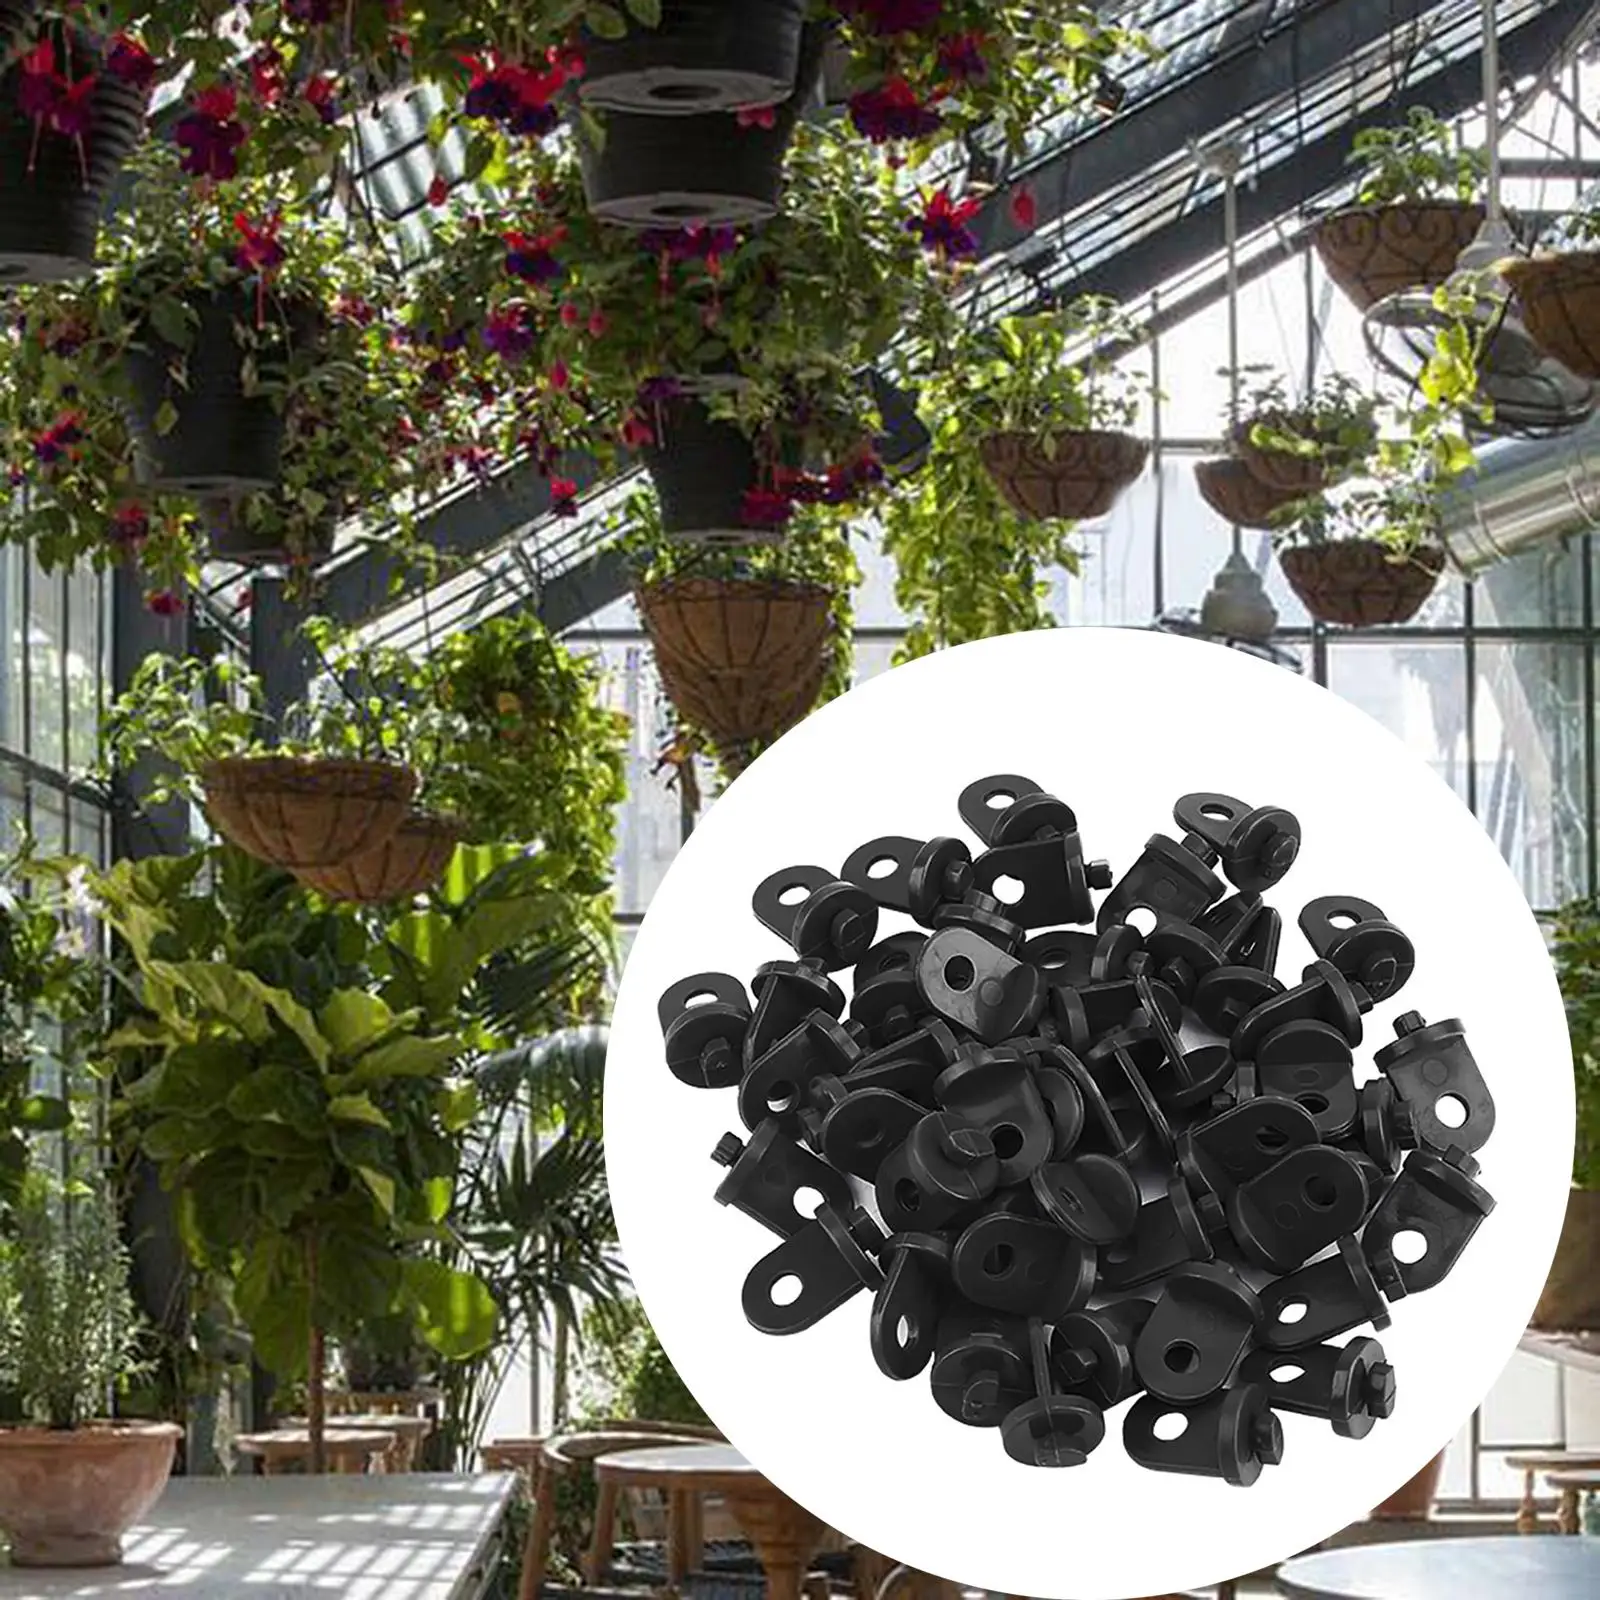 50x Greenhouse Plants Hook Hanger Twist Clips Accessories for Pots Insulation Netting Shading Tomato Hanging Flower Baskets